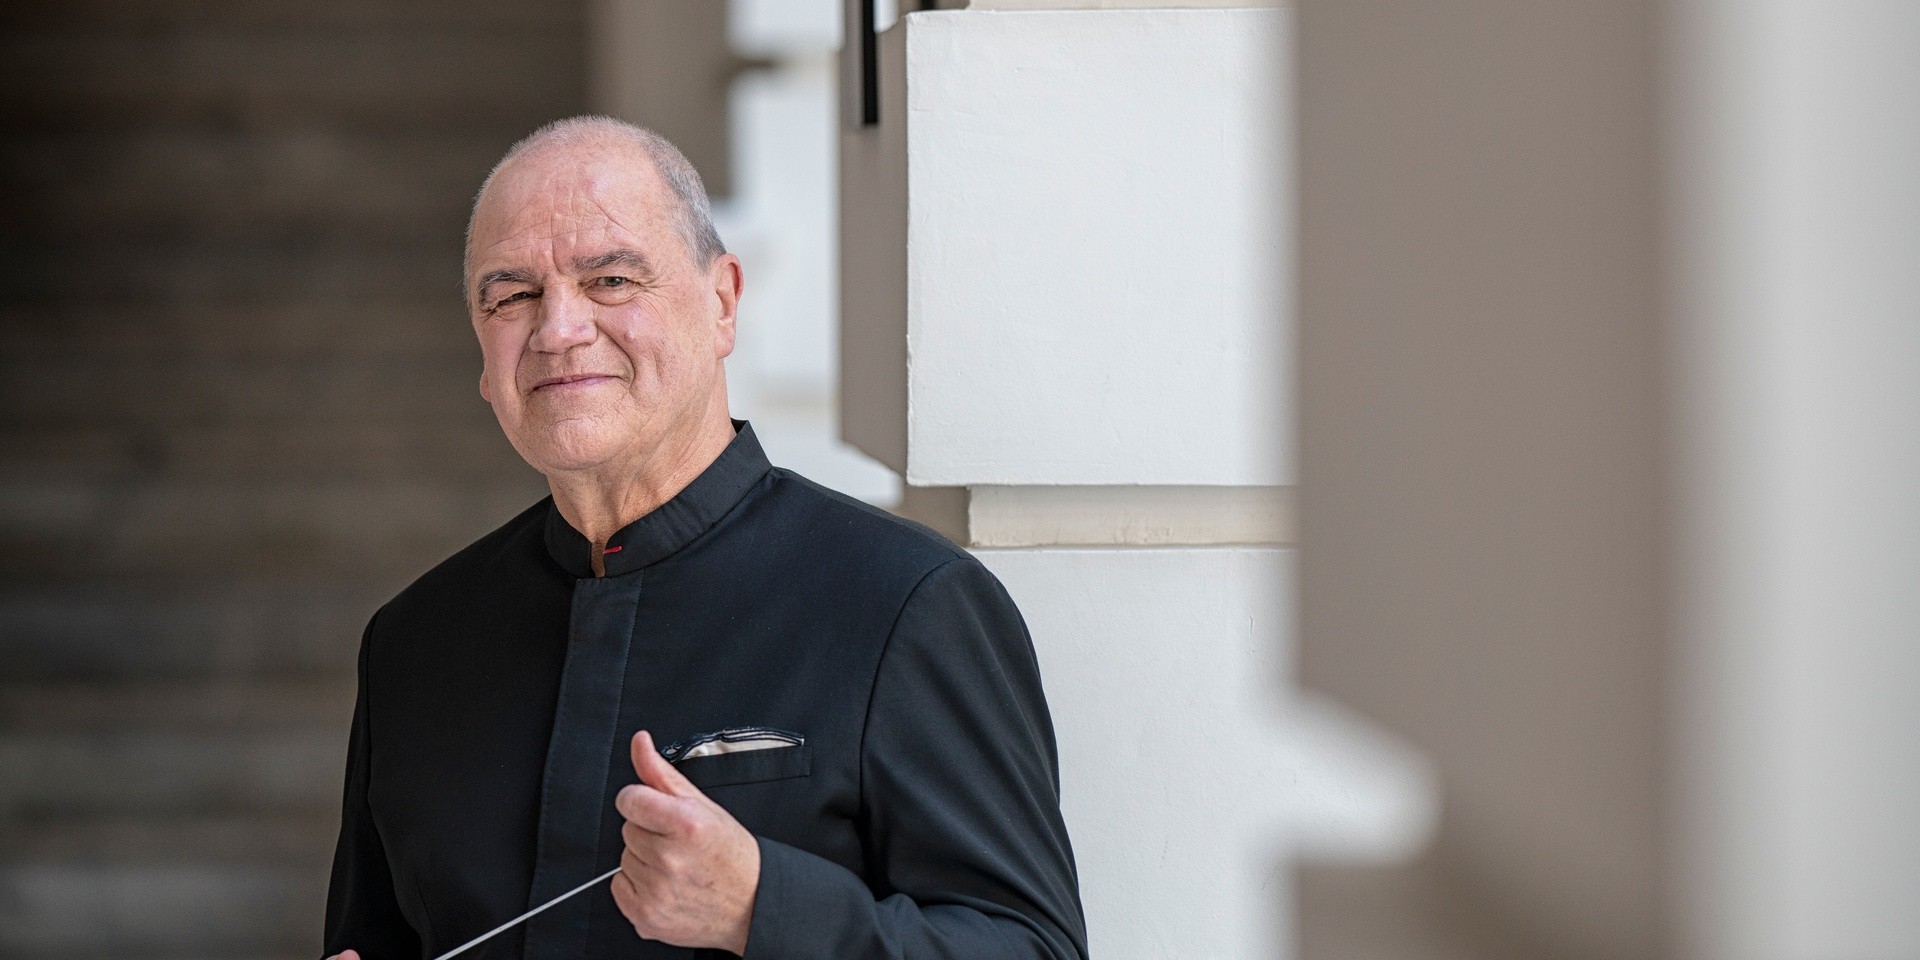 "A hungry audience is a good audience." — Maestro Hans Graf on being Music Director of the Singapore Symphony Orchestra, navigating through the pandemic, and hopes for new concert season